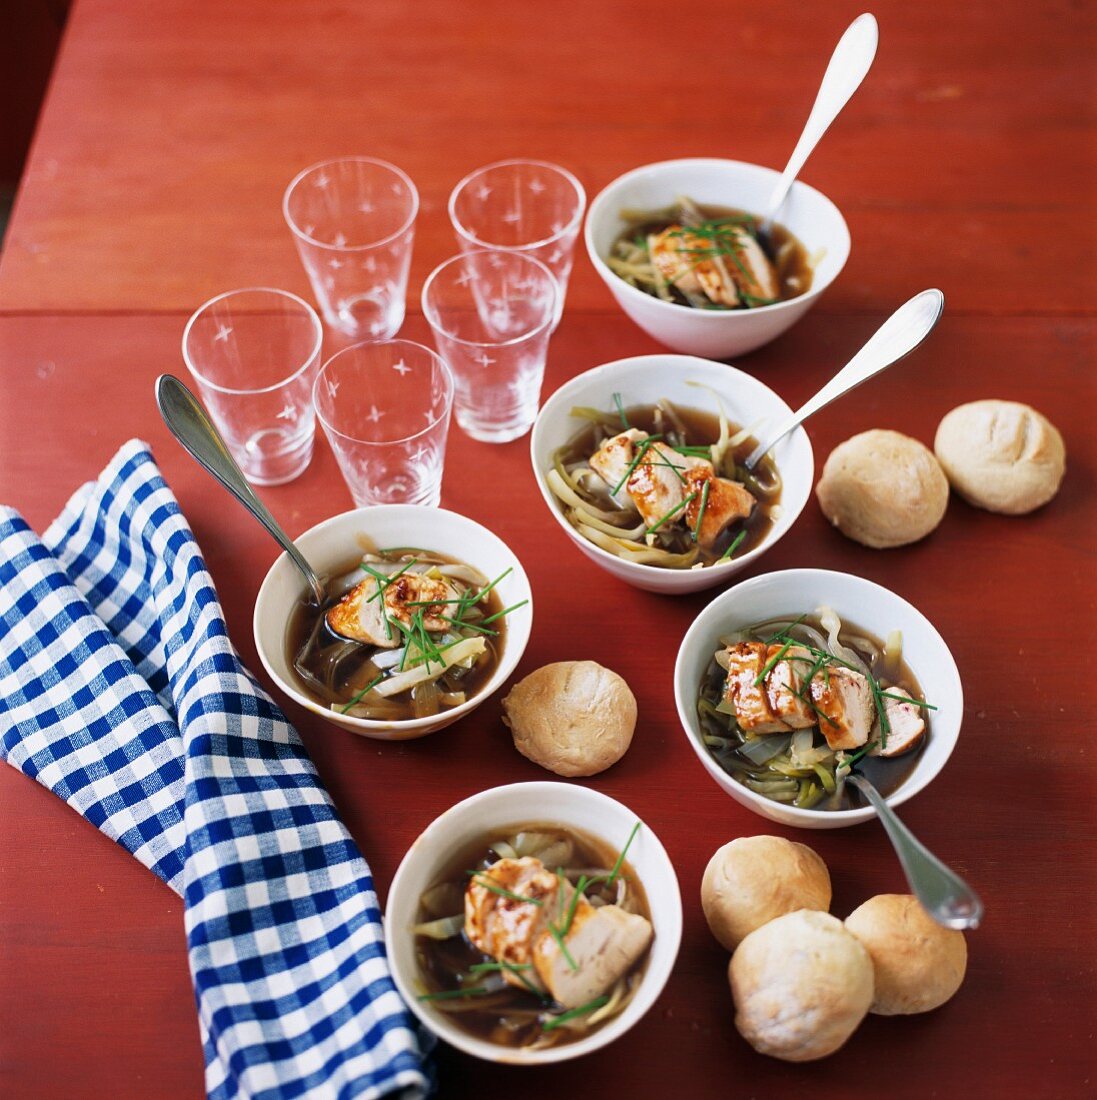 Chicken & noodle soup in bowls, served with bread rolls